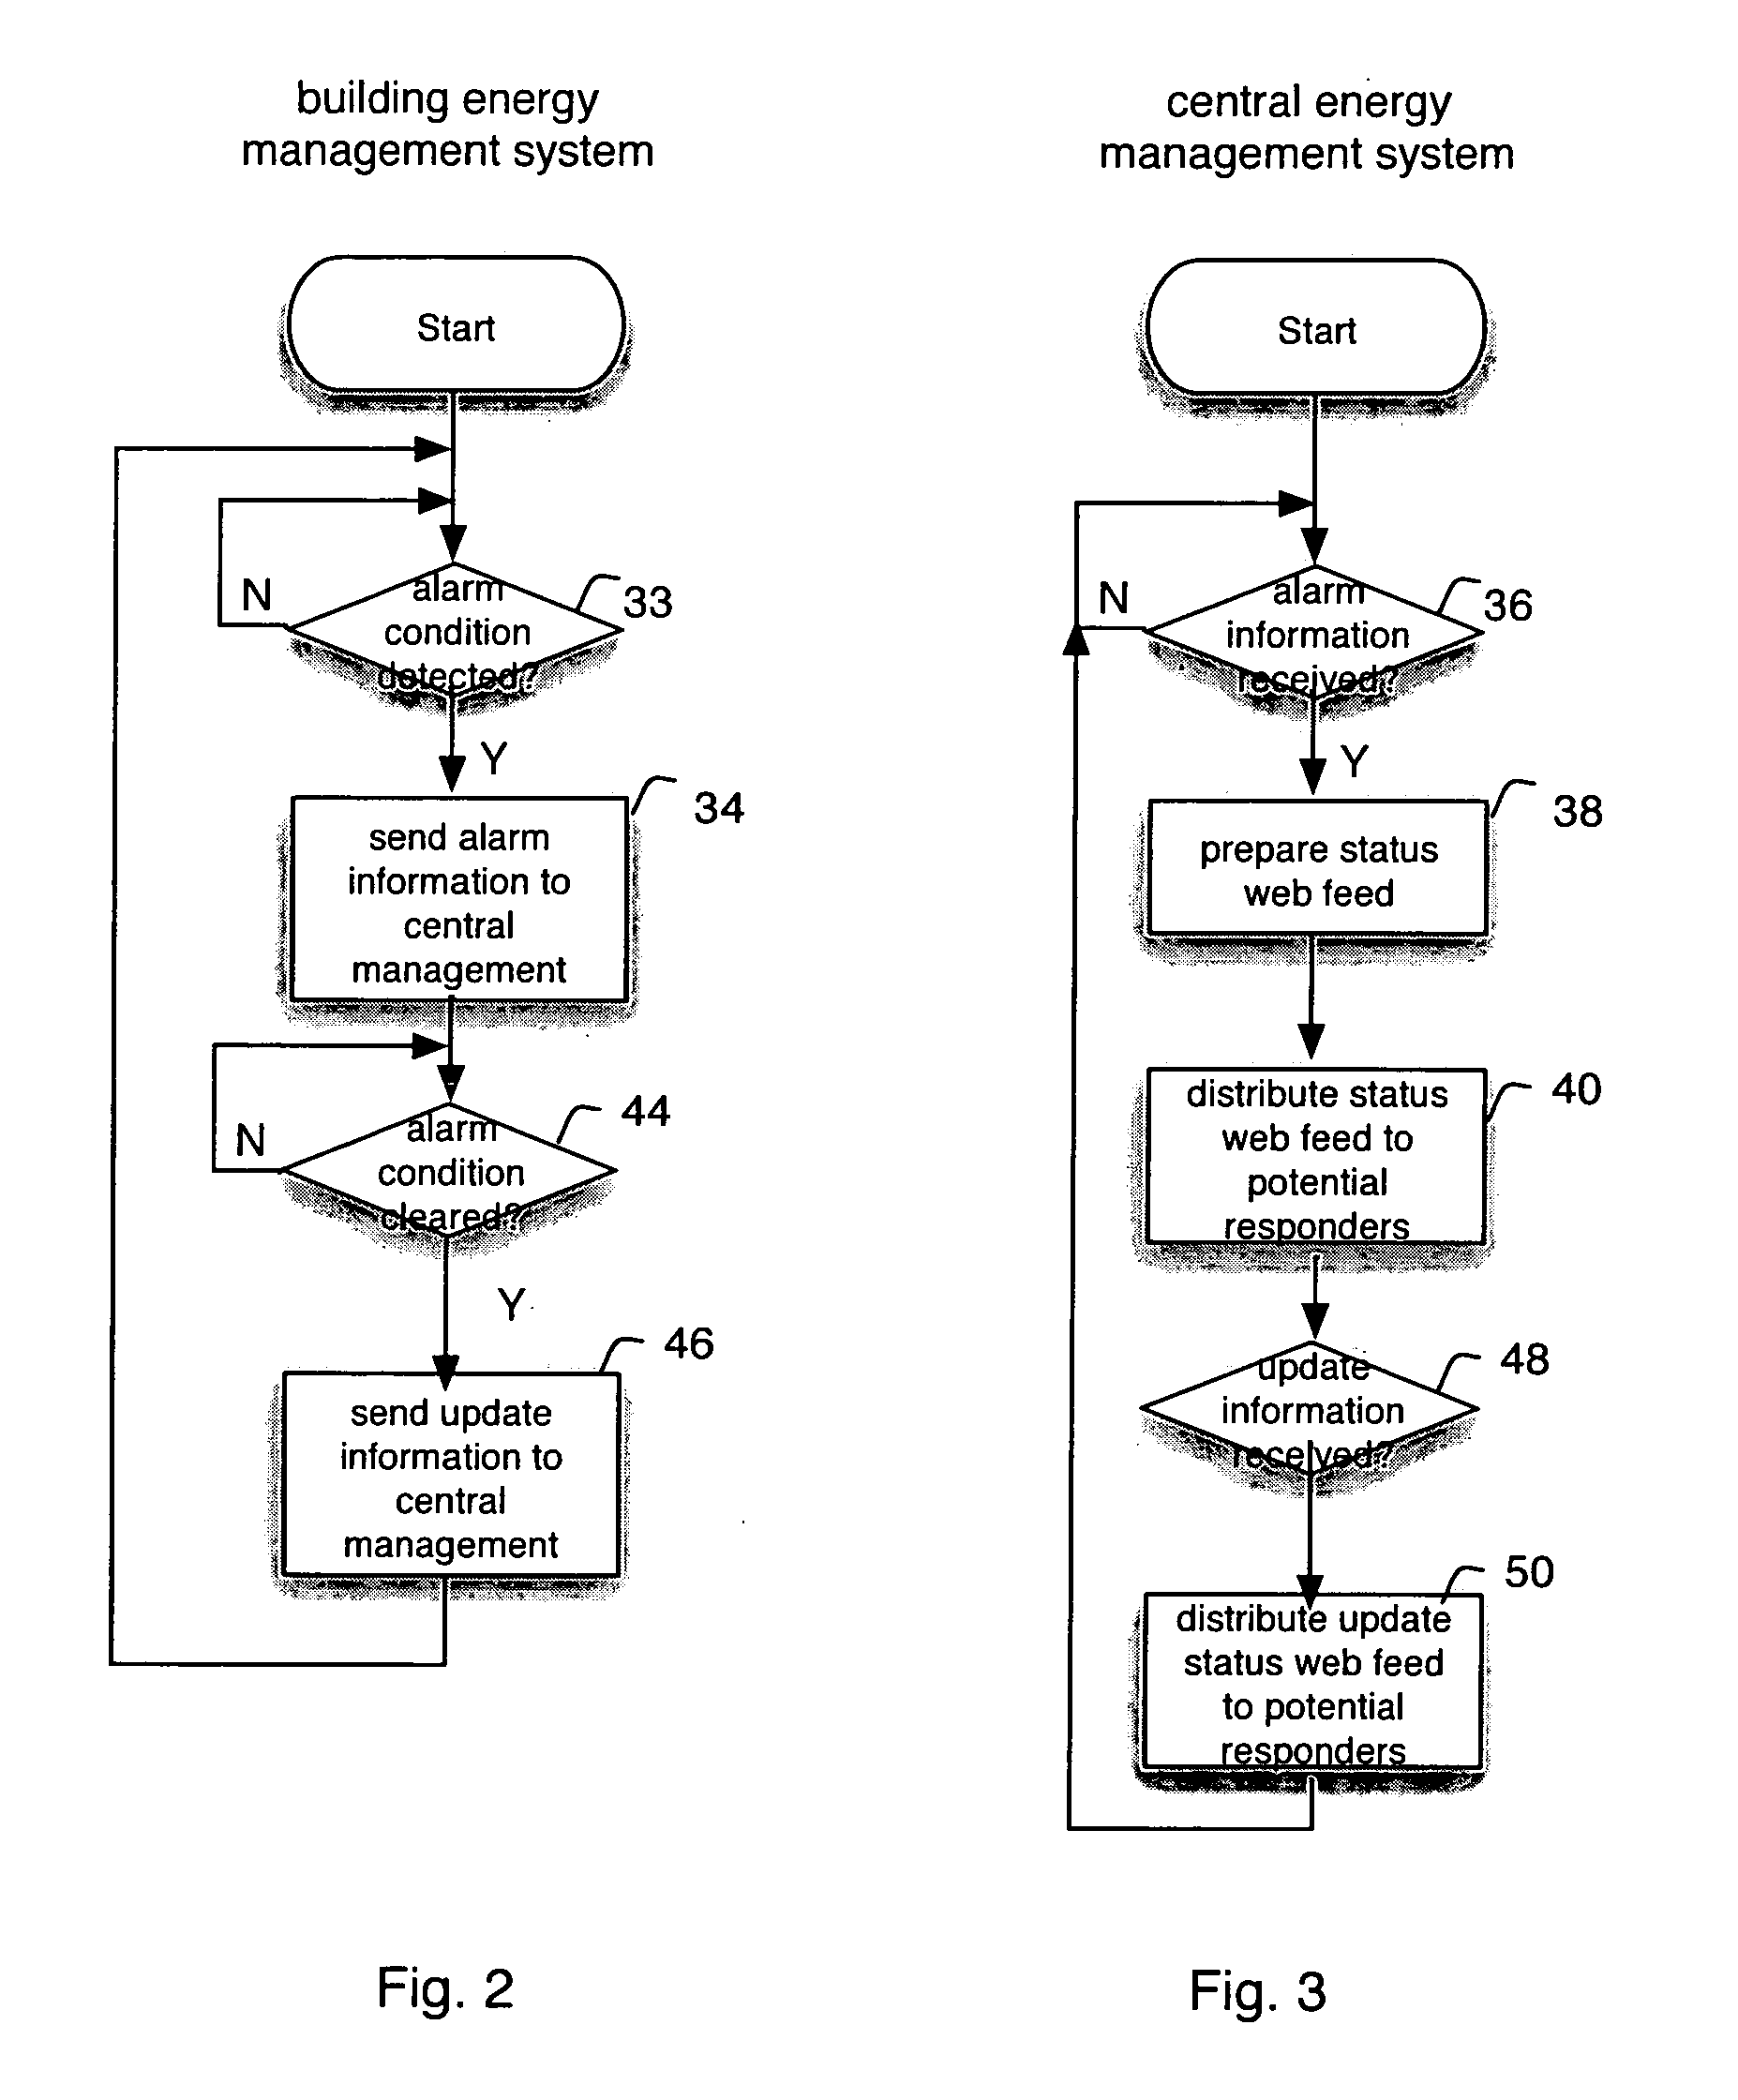 Distribution of system status information using a web feed